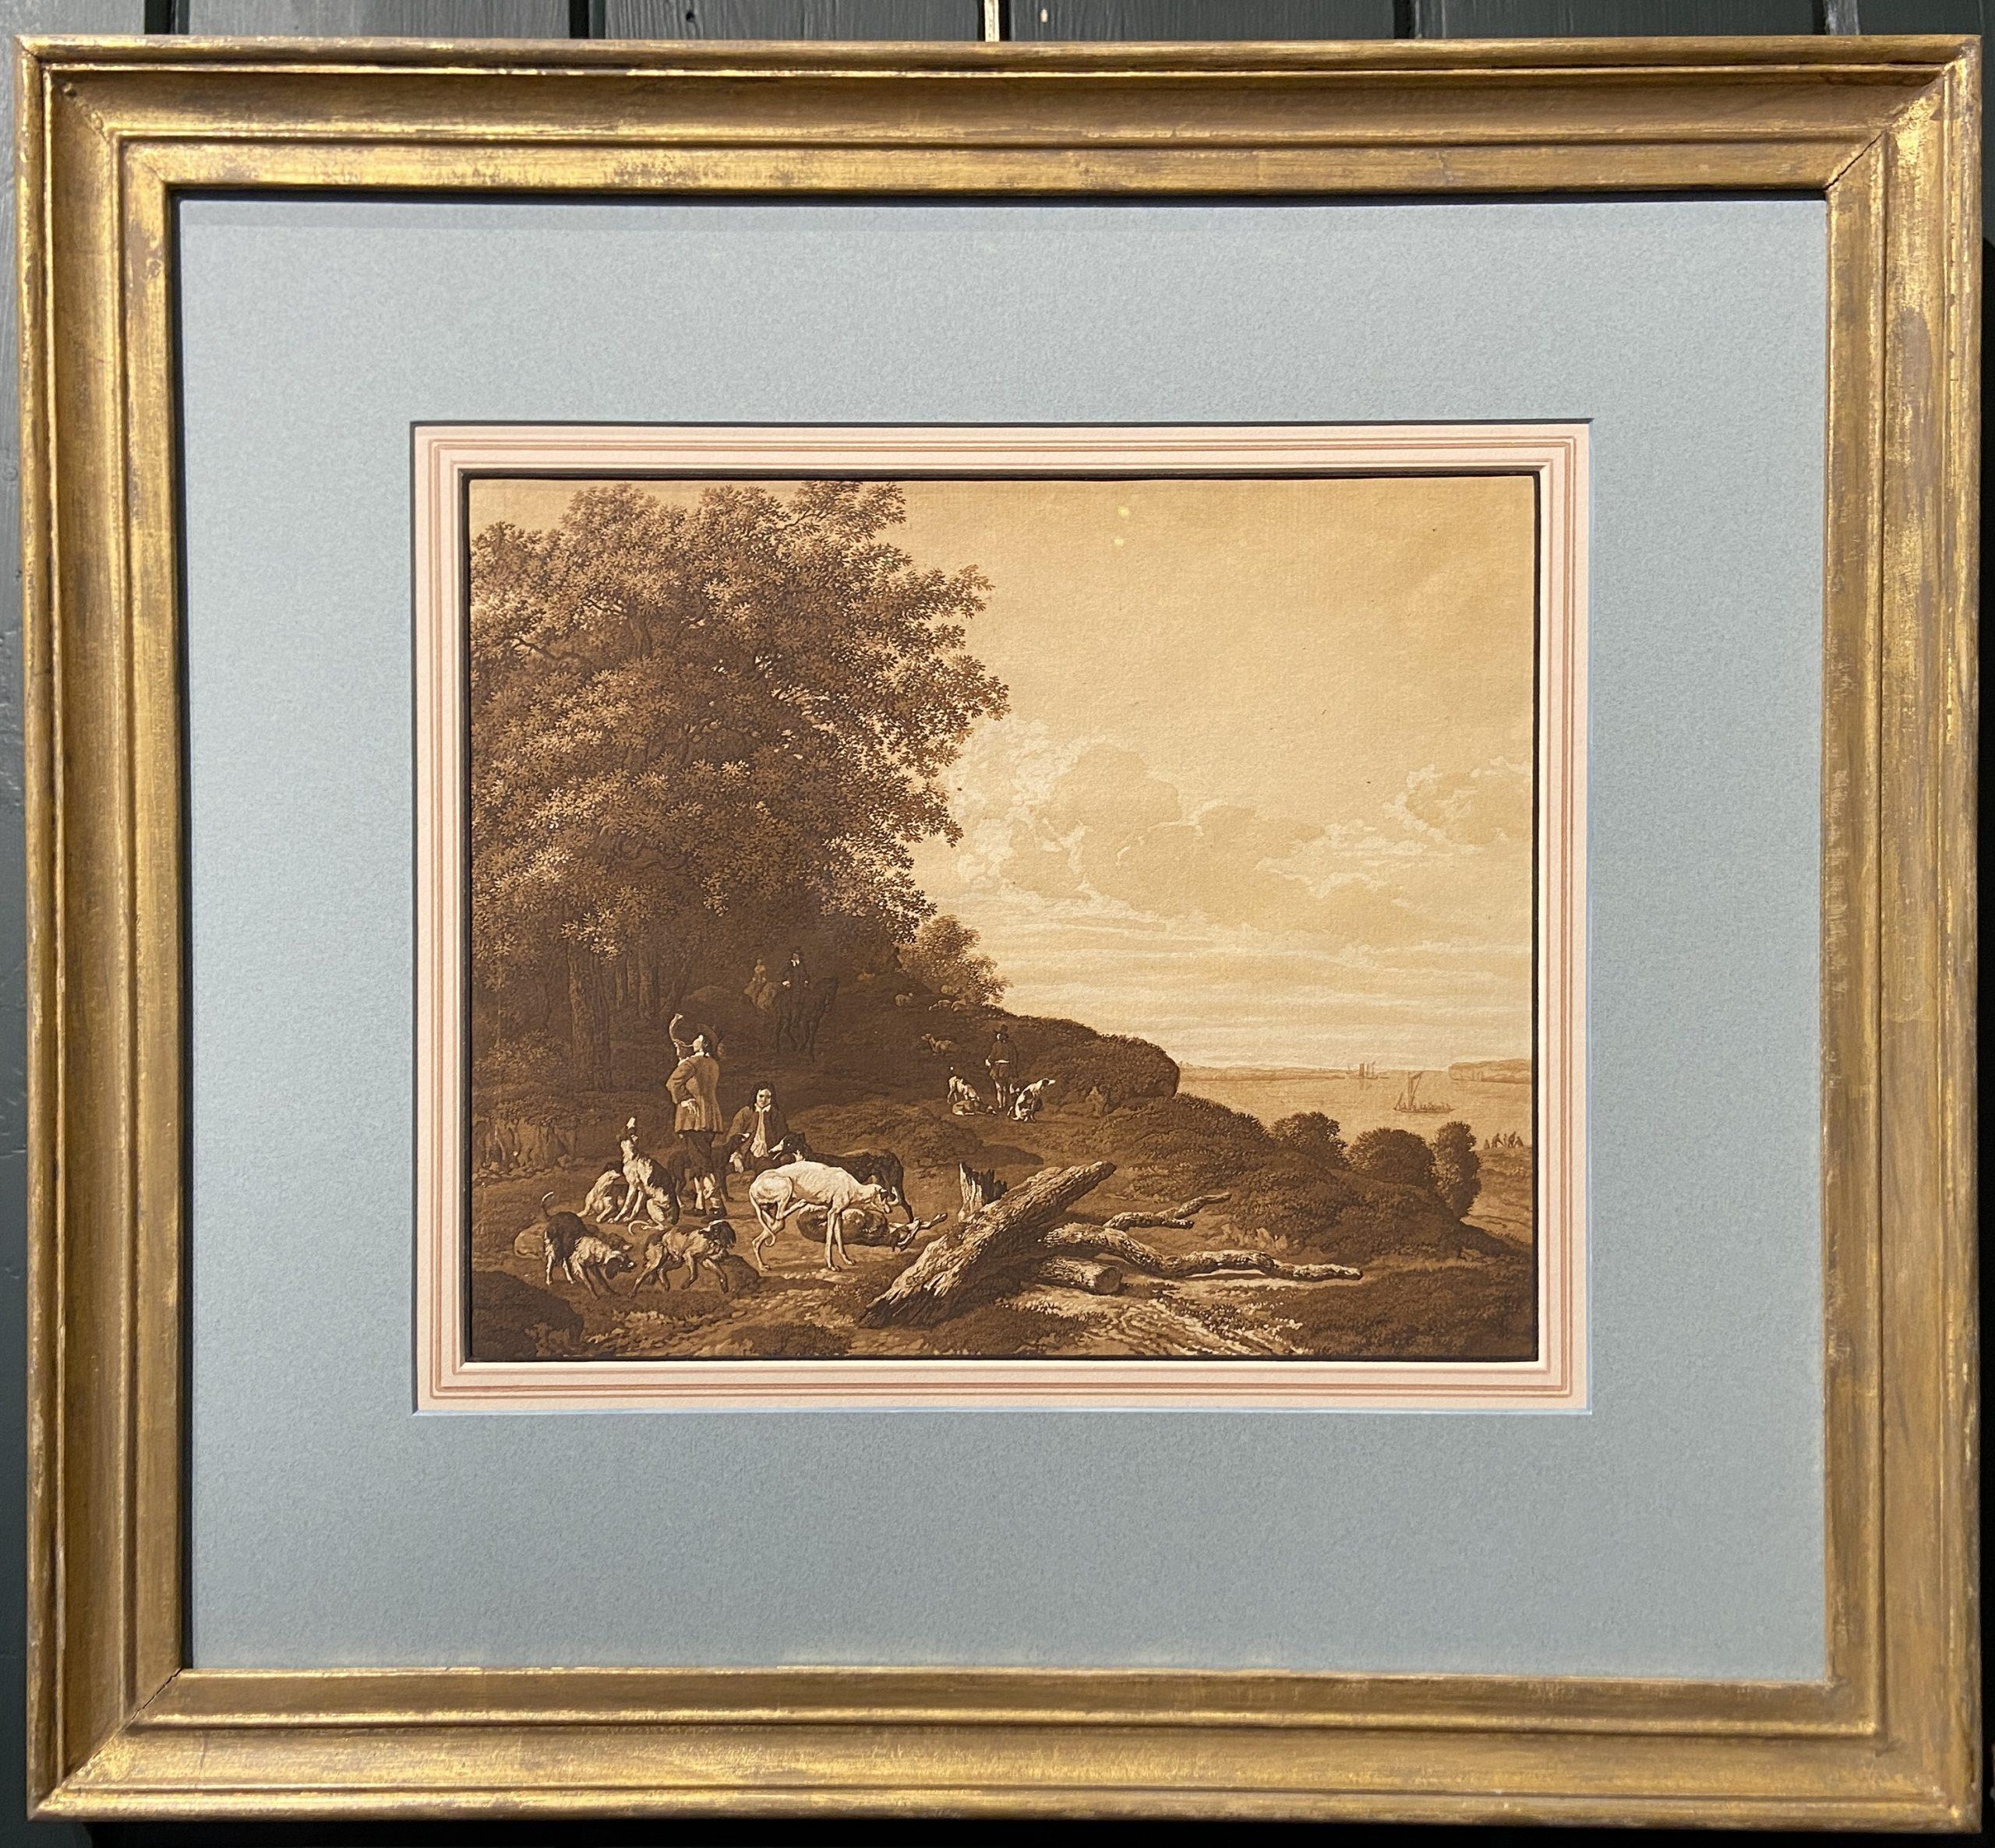 Pen and ink, brown wash, heightened with white bodycolour
Image size: 9 x 10 1/2 inches (22.75 x 26.75 cm)
Mounted with hand made gilt frame

Lingelbach presents a scene from the end of a hunting trip and we can see that a group of dogs have already